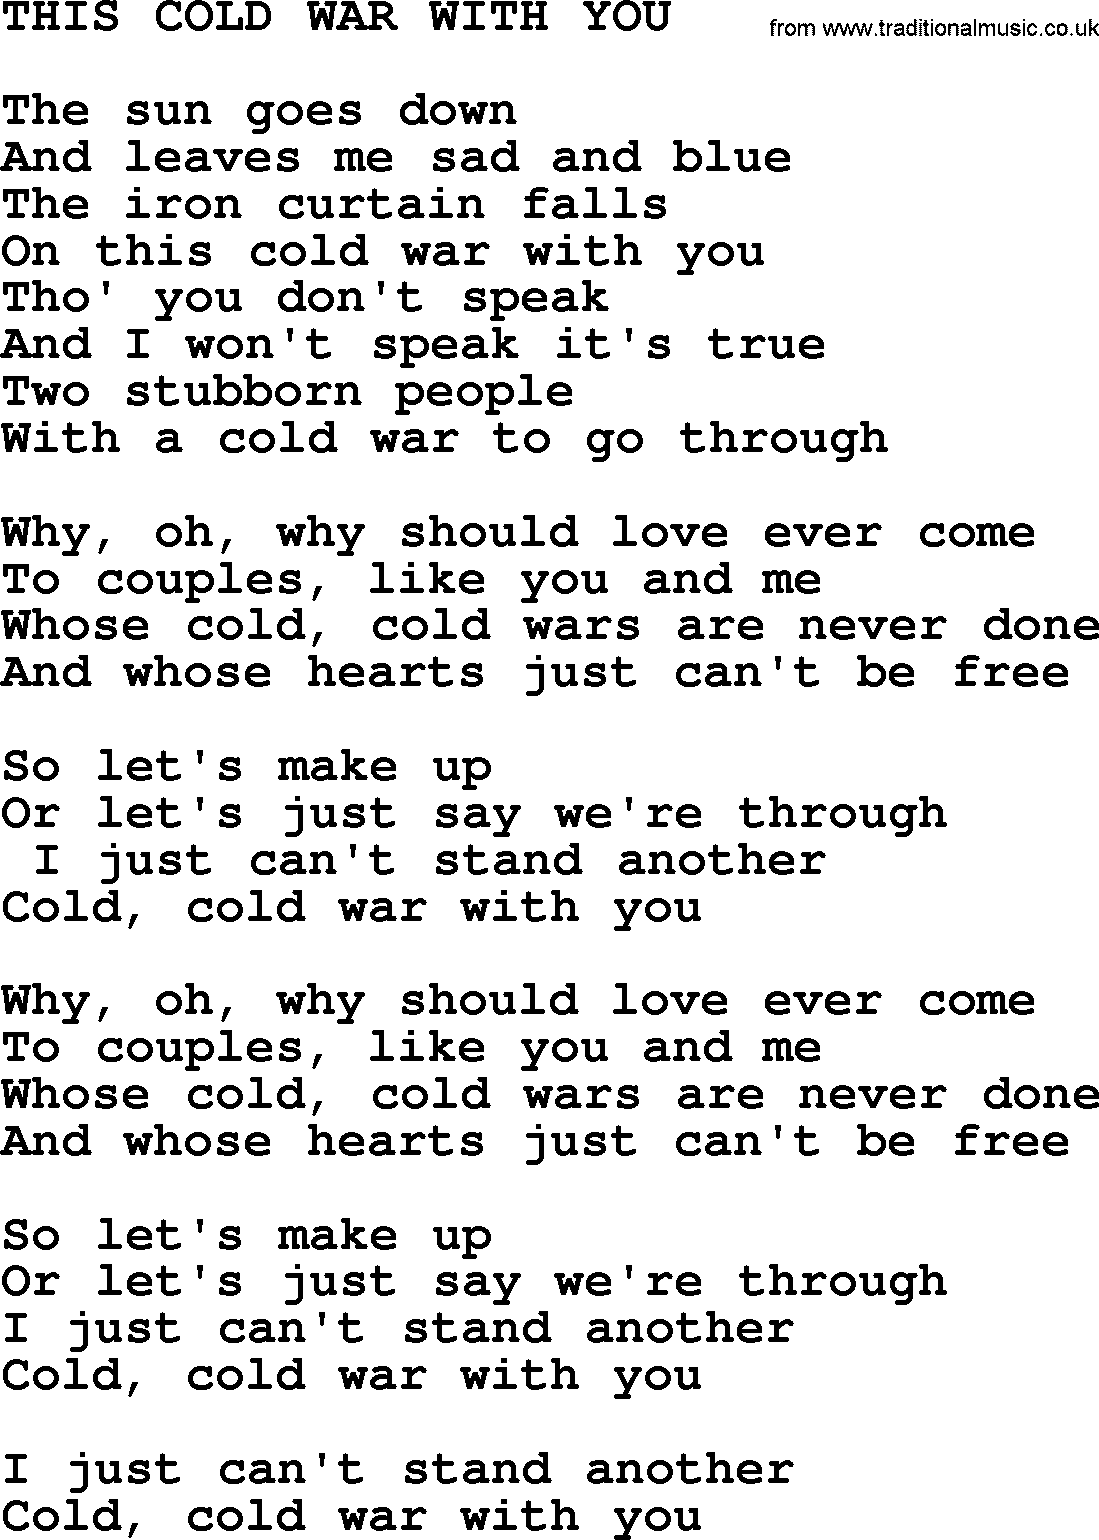 Merle Haggard song: This Cold War With You, lyrics.